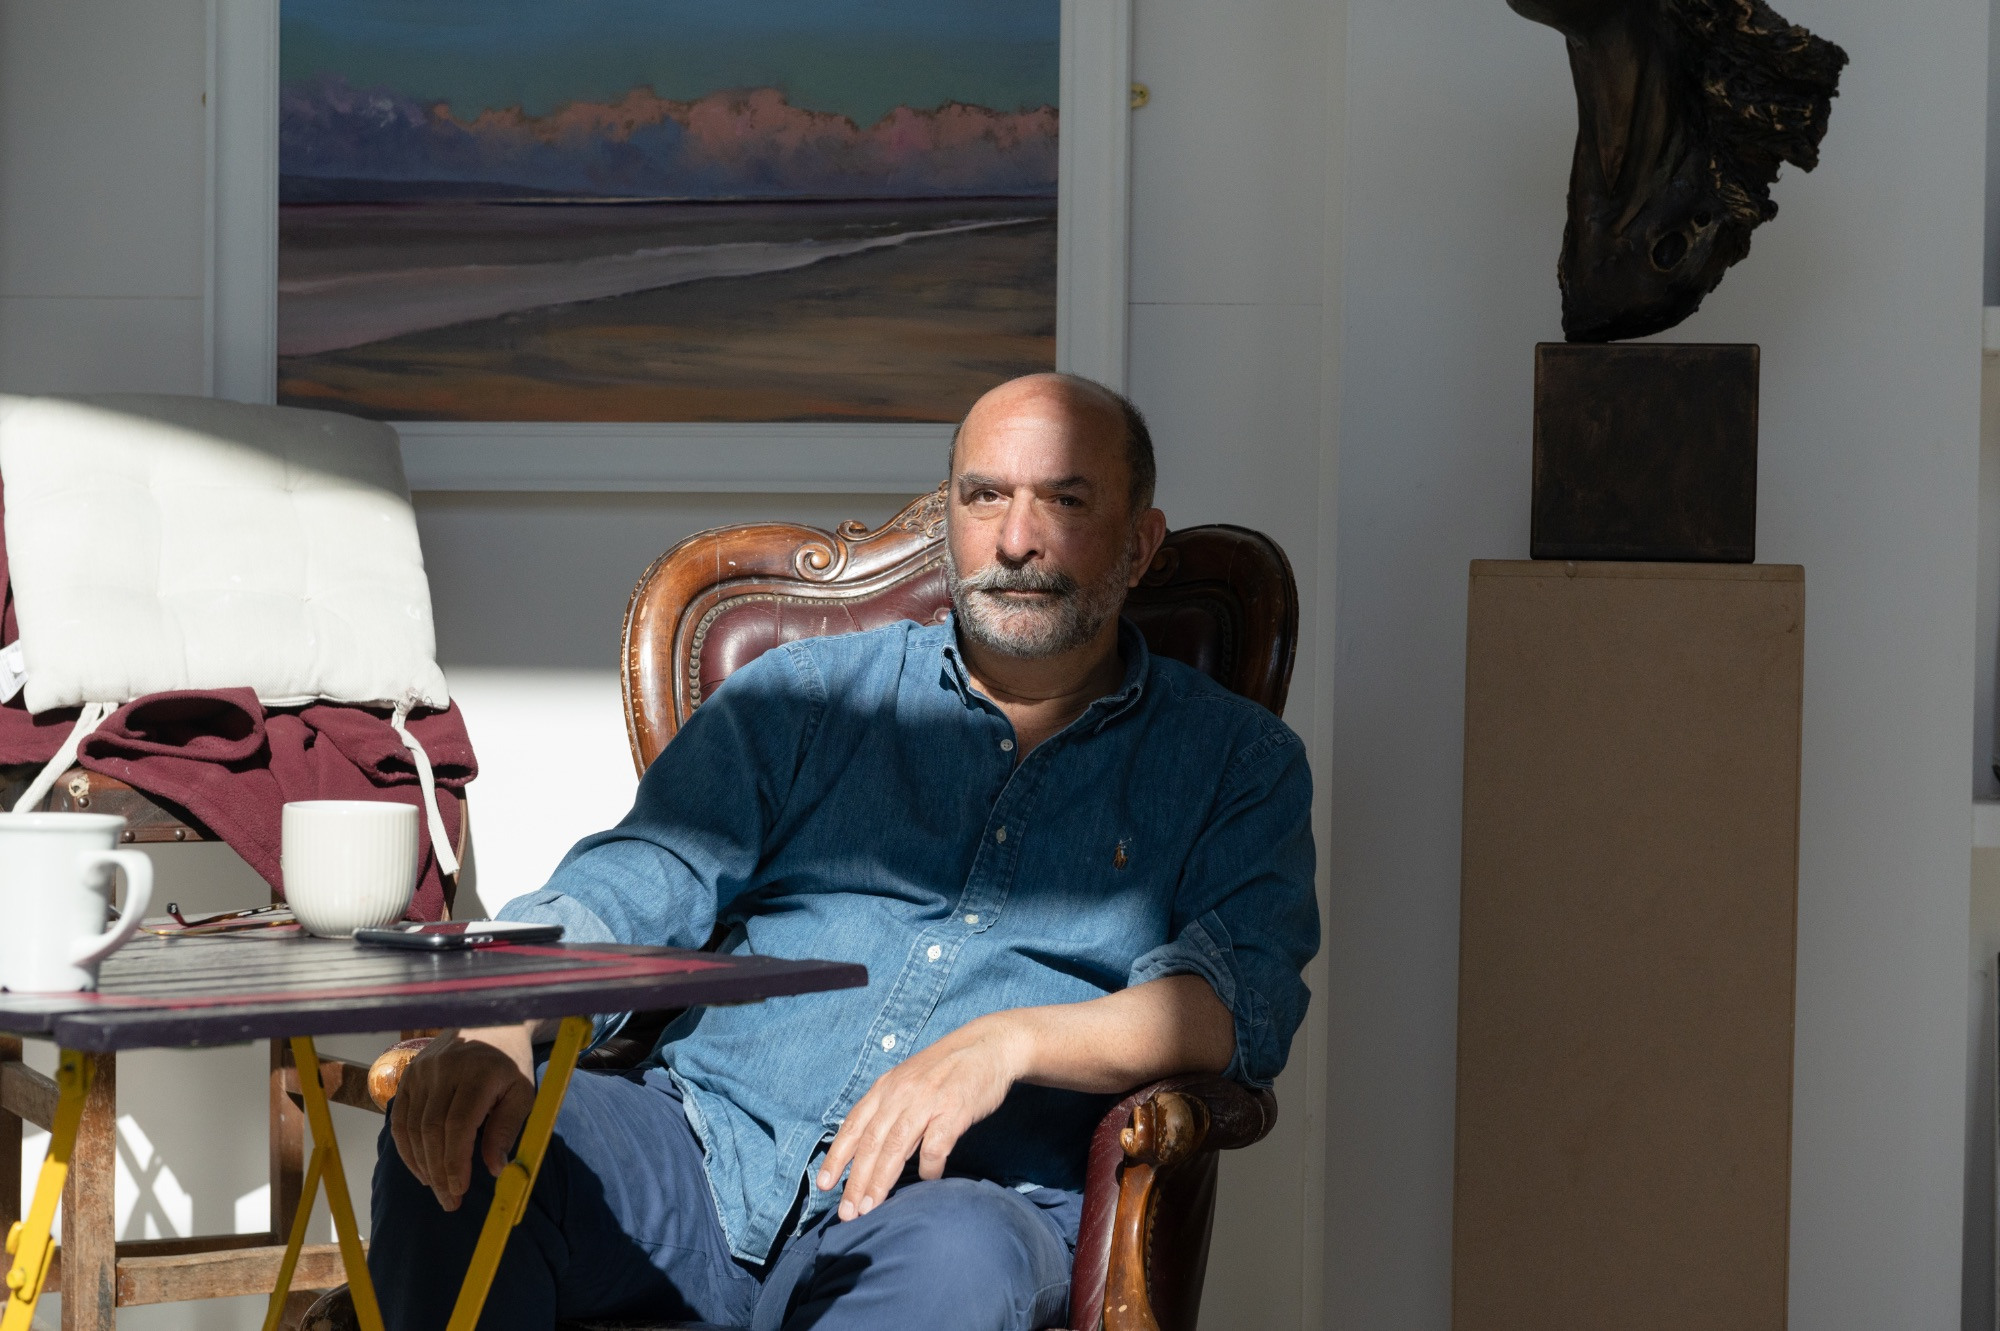 Portrait of a man sitting inside with paintings and sculpture around him